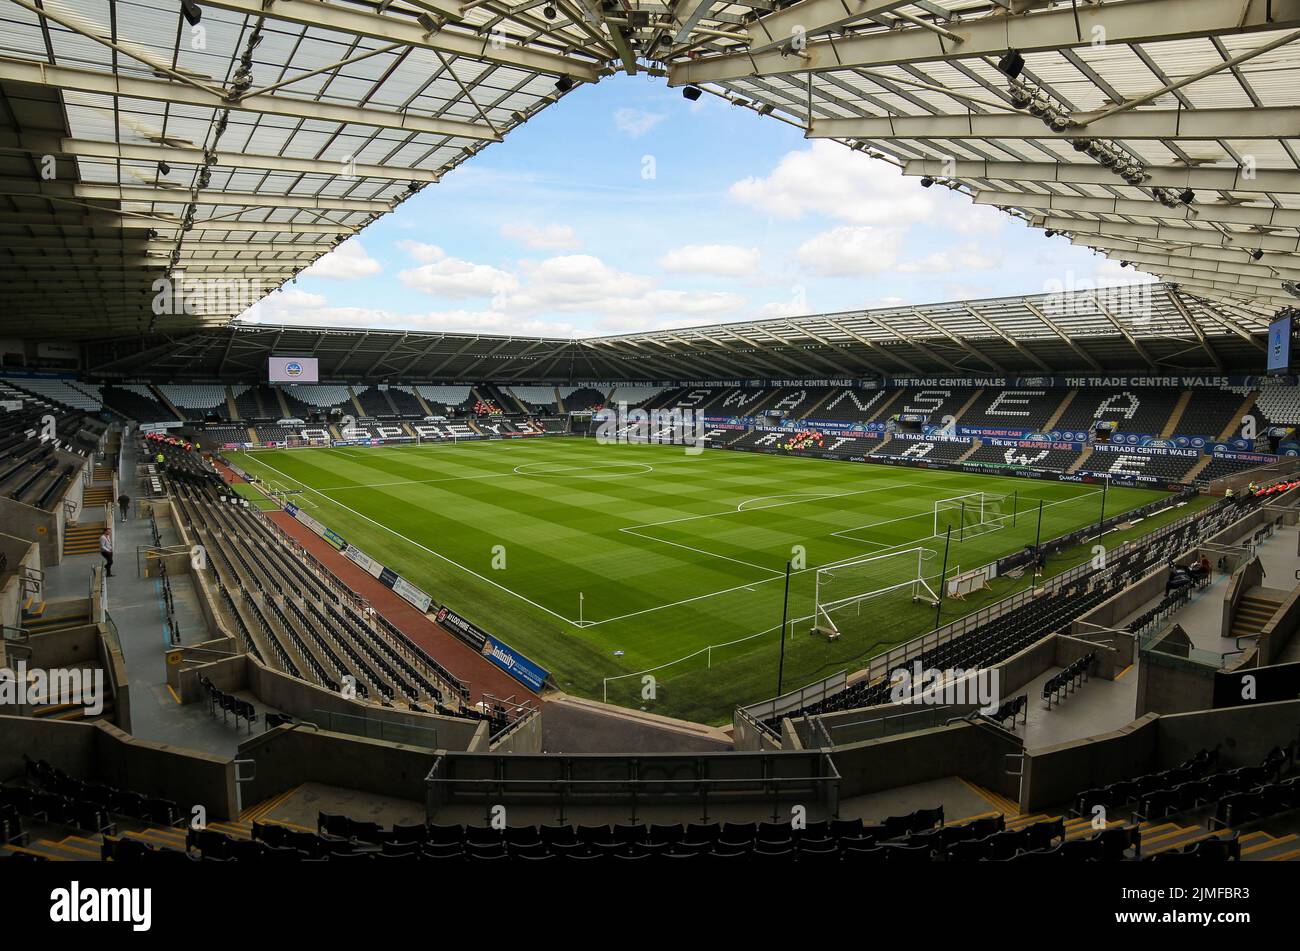 6th August 2022; Swansea.com stadium, Swansea, Wales; Championship football, Swansea versus Blackburn: A general view of the Swansea.com Stadium and pitch Stock Photo